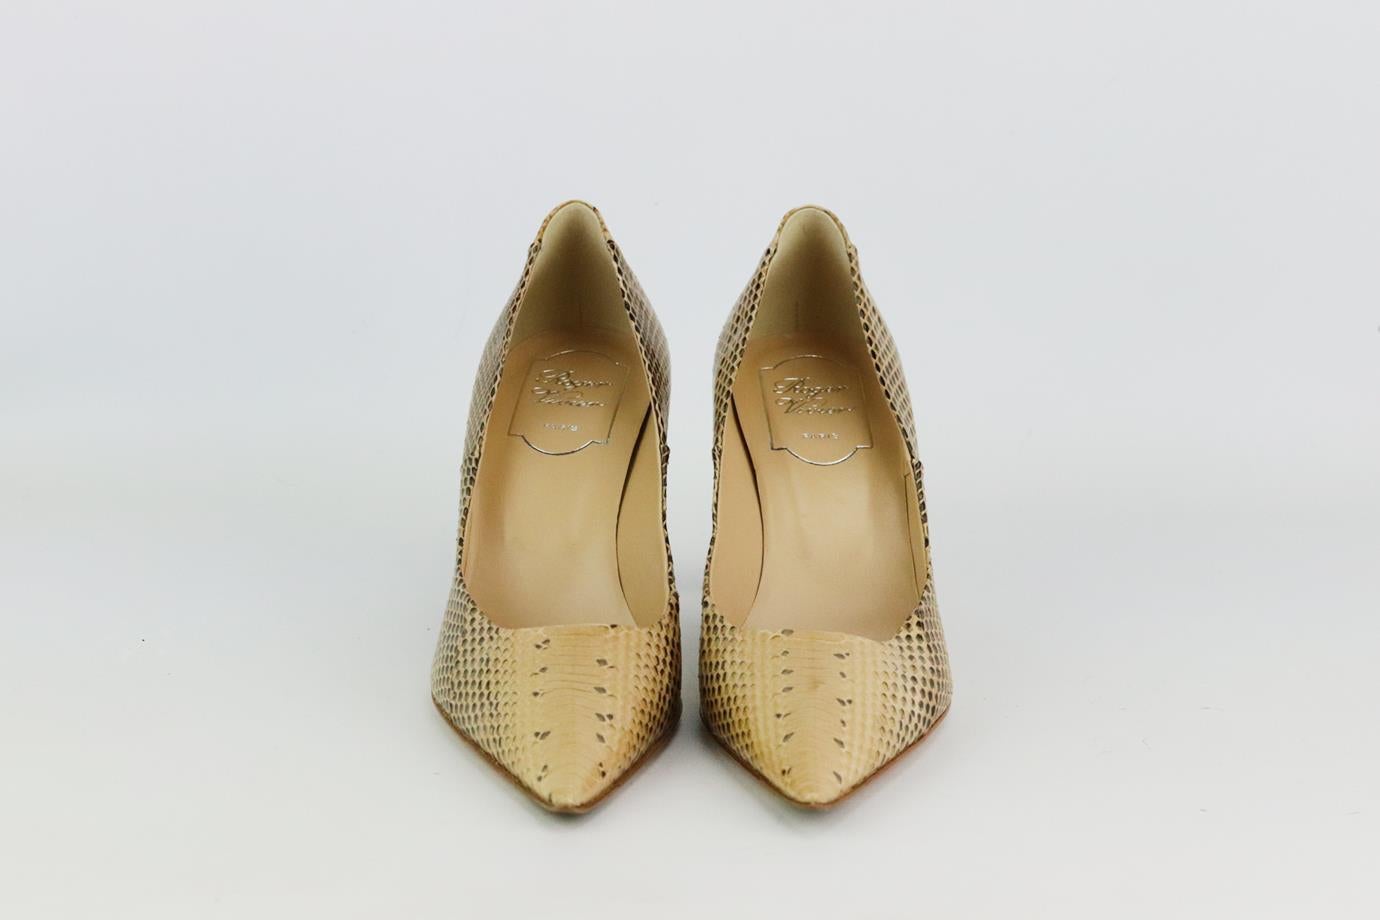 These pumps by Roger Vivier are a classic style that will never date, made in Italy from beige and black python, they have sharp pointed toes and comfortable 63 mm heels to take you from morning meetings to dinner with friends. Heel measures